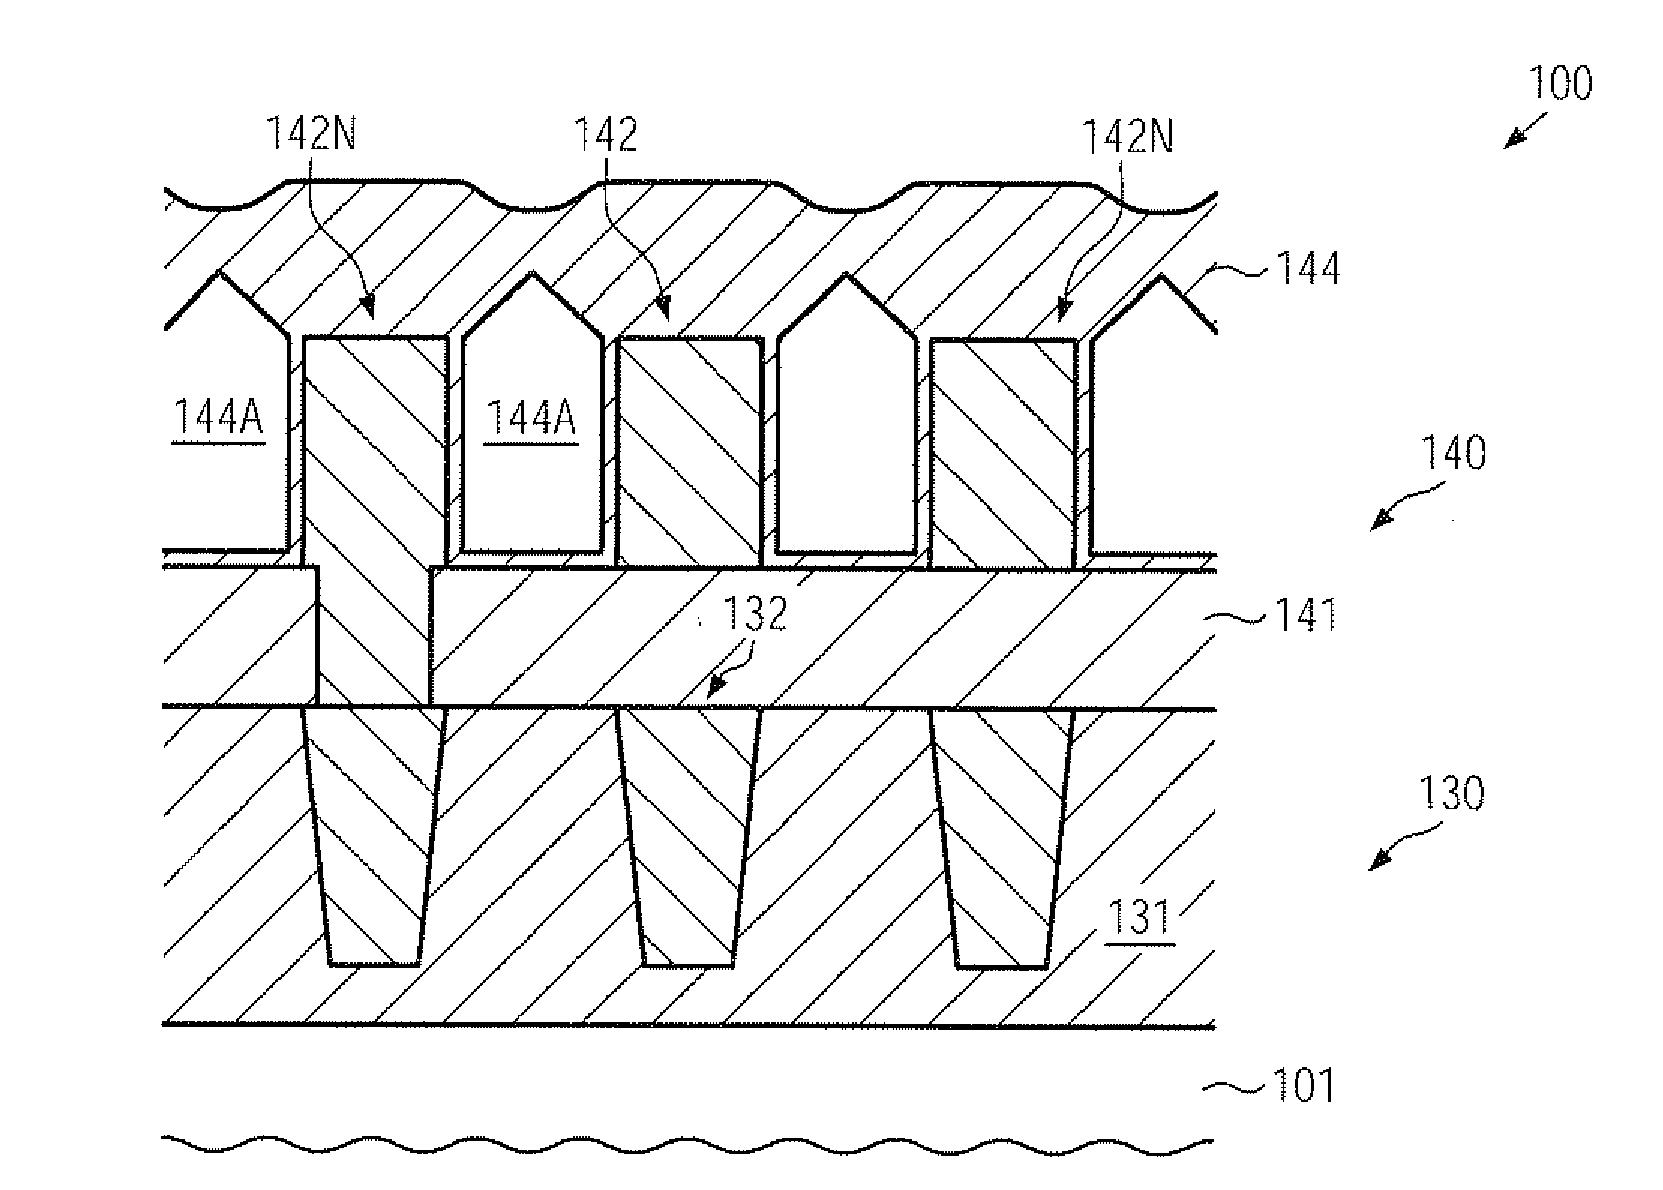 Microstructure device including a metallization structure with self-aligned air gaps formed based on a sacrificial material